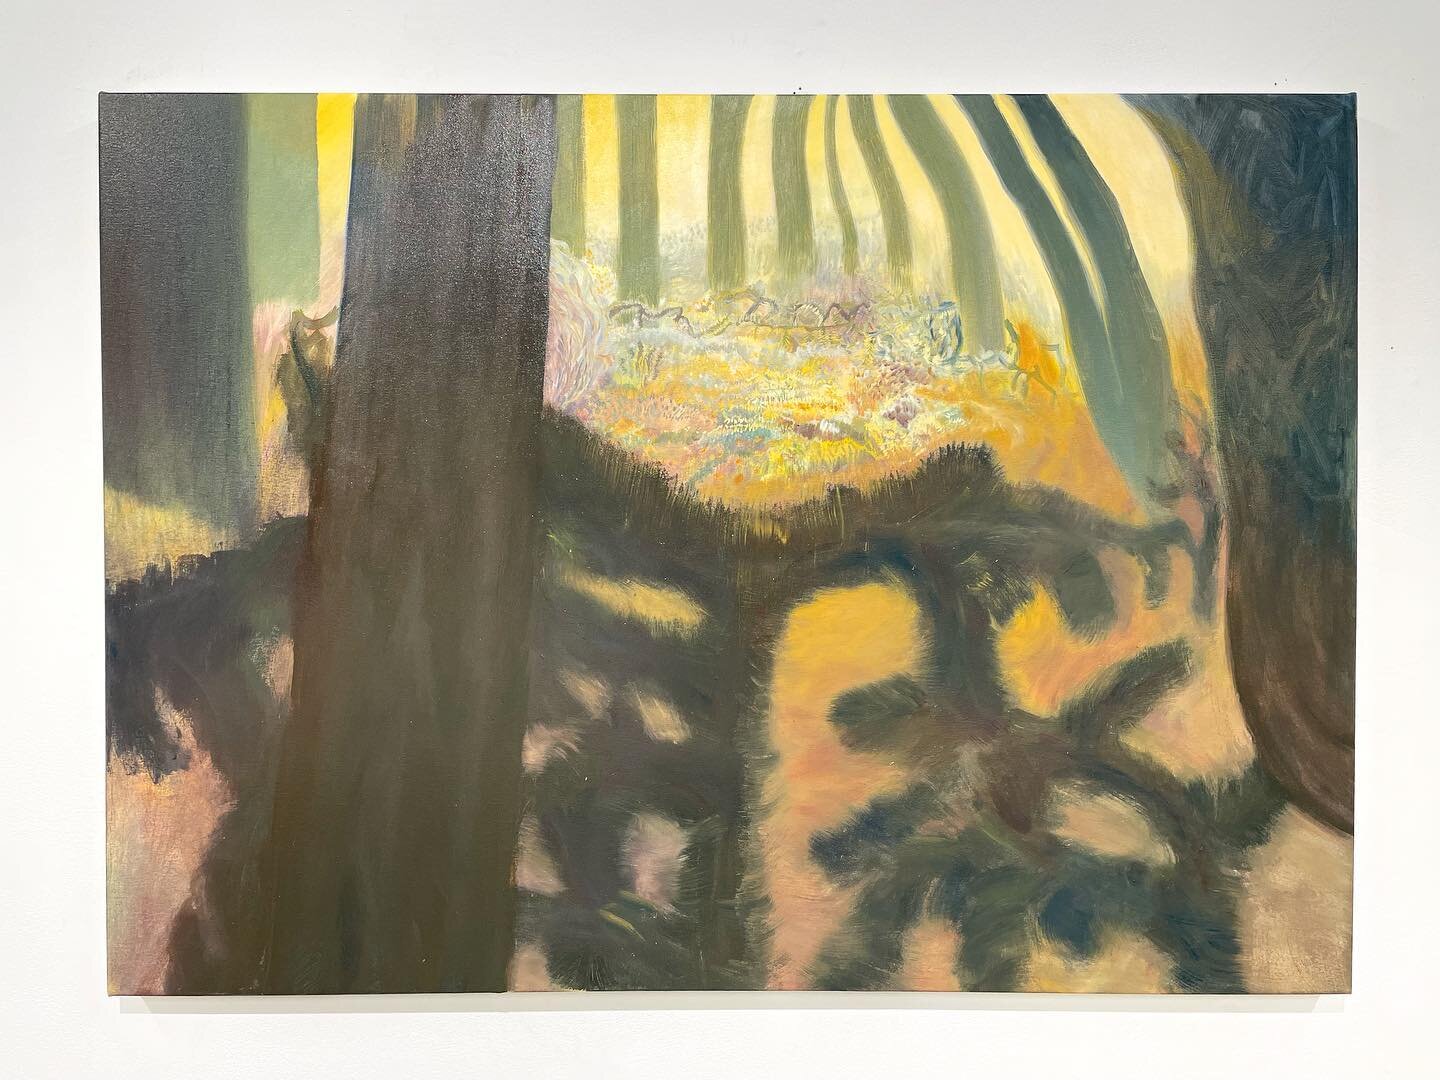 Incantation, 2023
oil on canvas
36 x 48 in
.
.
.
#contemporarypainting 
#landscapepainting
#huntermfa
#cactus